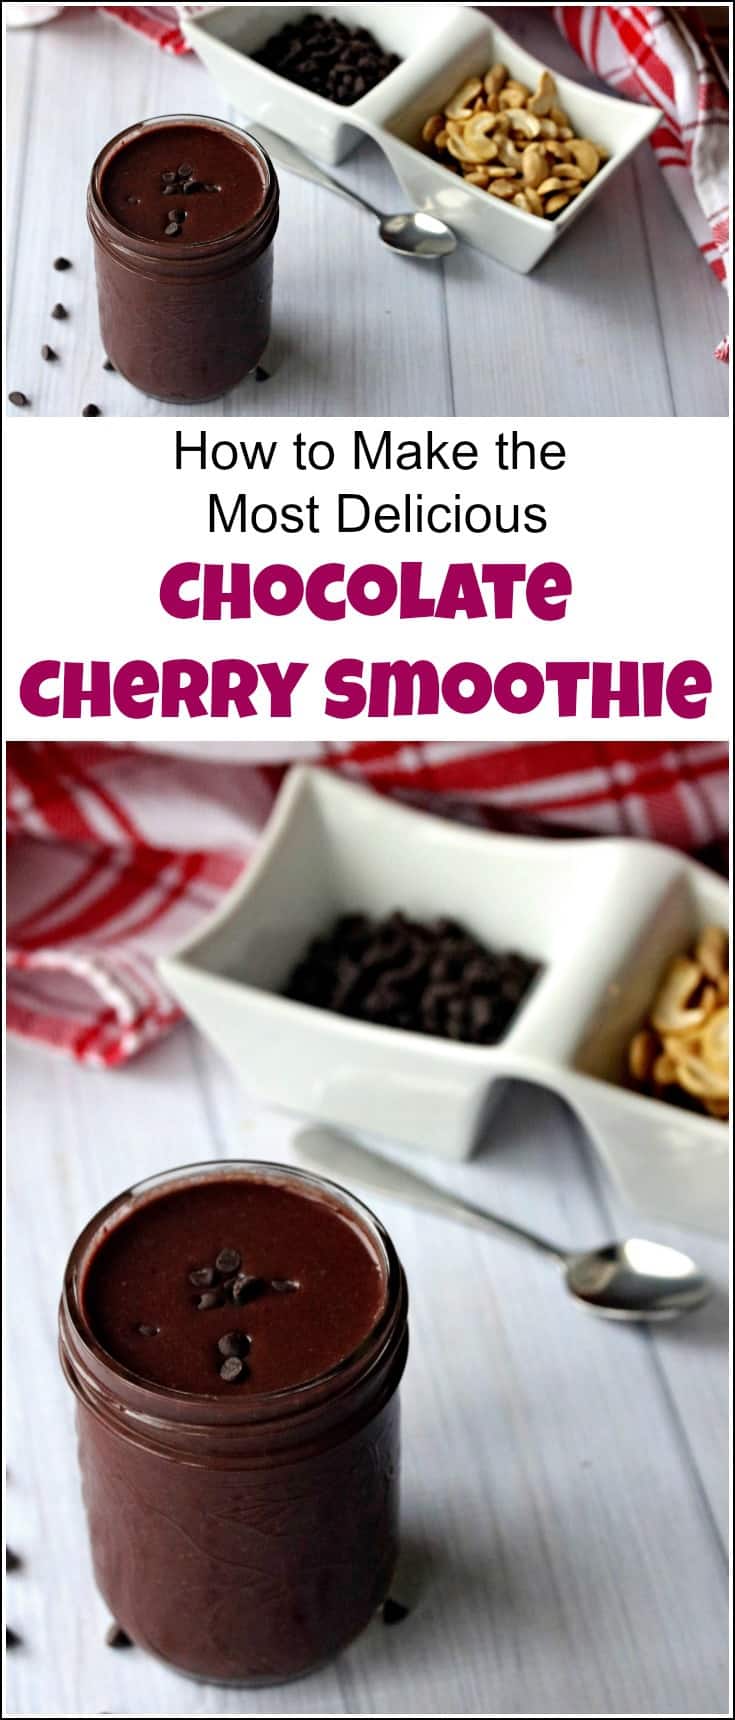 Smoothies with cherries are great but a chocolate cherry smoothie is even better. There is nothing better than a delicious cherry smoothie with cacao for a healthy sweet treat. This cherry smoothie recipe with chocolate is the perfect cherry chocolate smoothie recipe for any time of day. Vegan chocolate shake, vegan cherry chocolate smoothie, healthy cherry smoothie, smoothie recipes